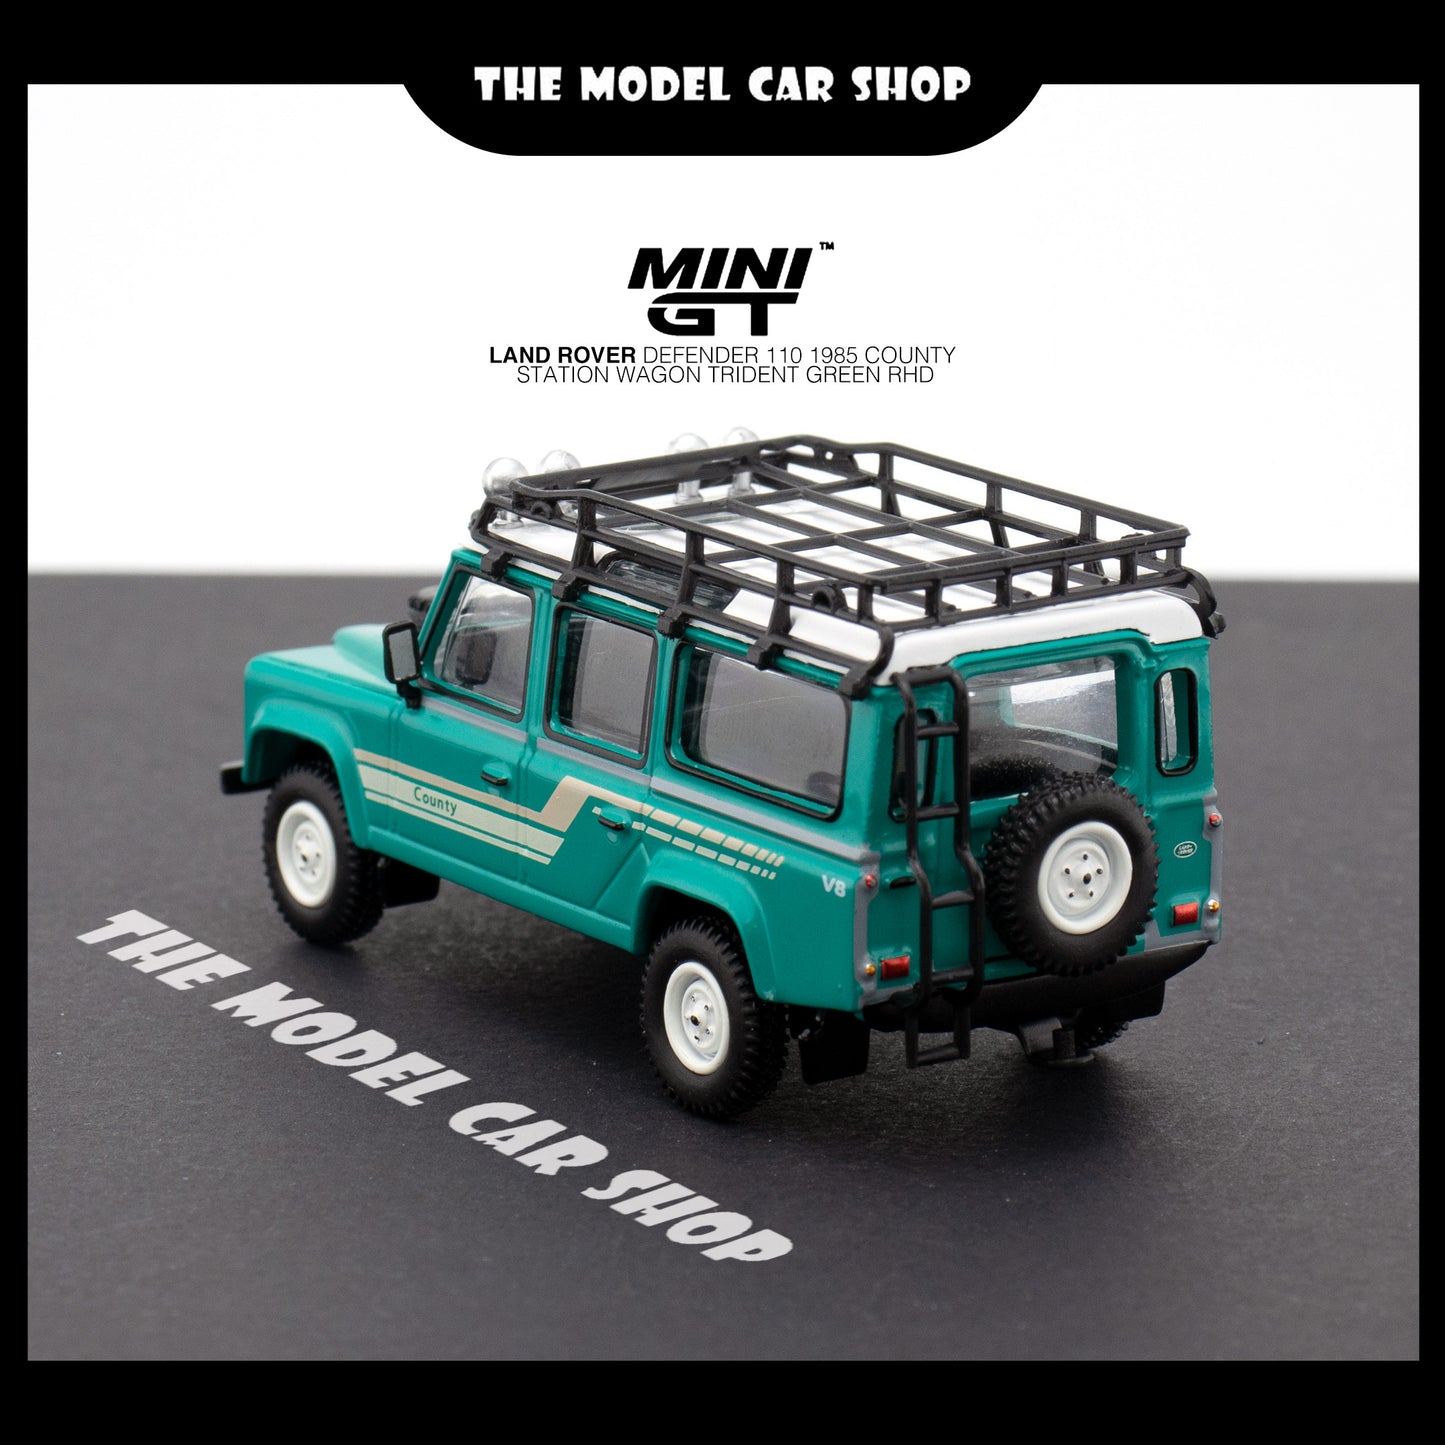 [MINI GT] Land Rover Defender 110 1985 County Station Wagon - Trident Green